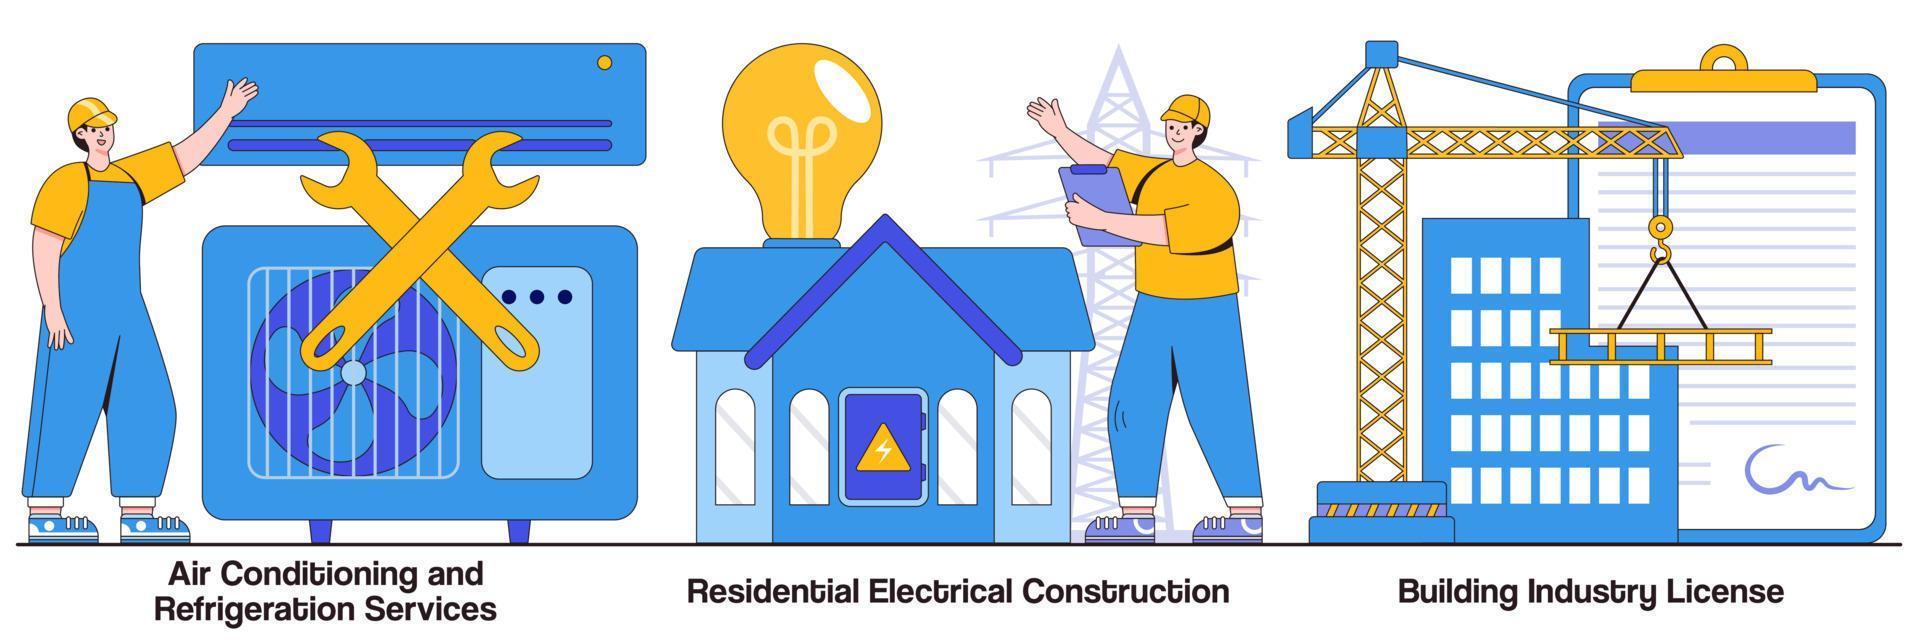 Air Conditioning and Refrigeration Services, Residential Electrical Construction, Building Industry License Illustrated Pack vector